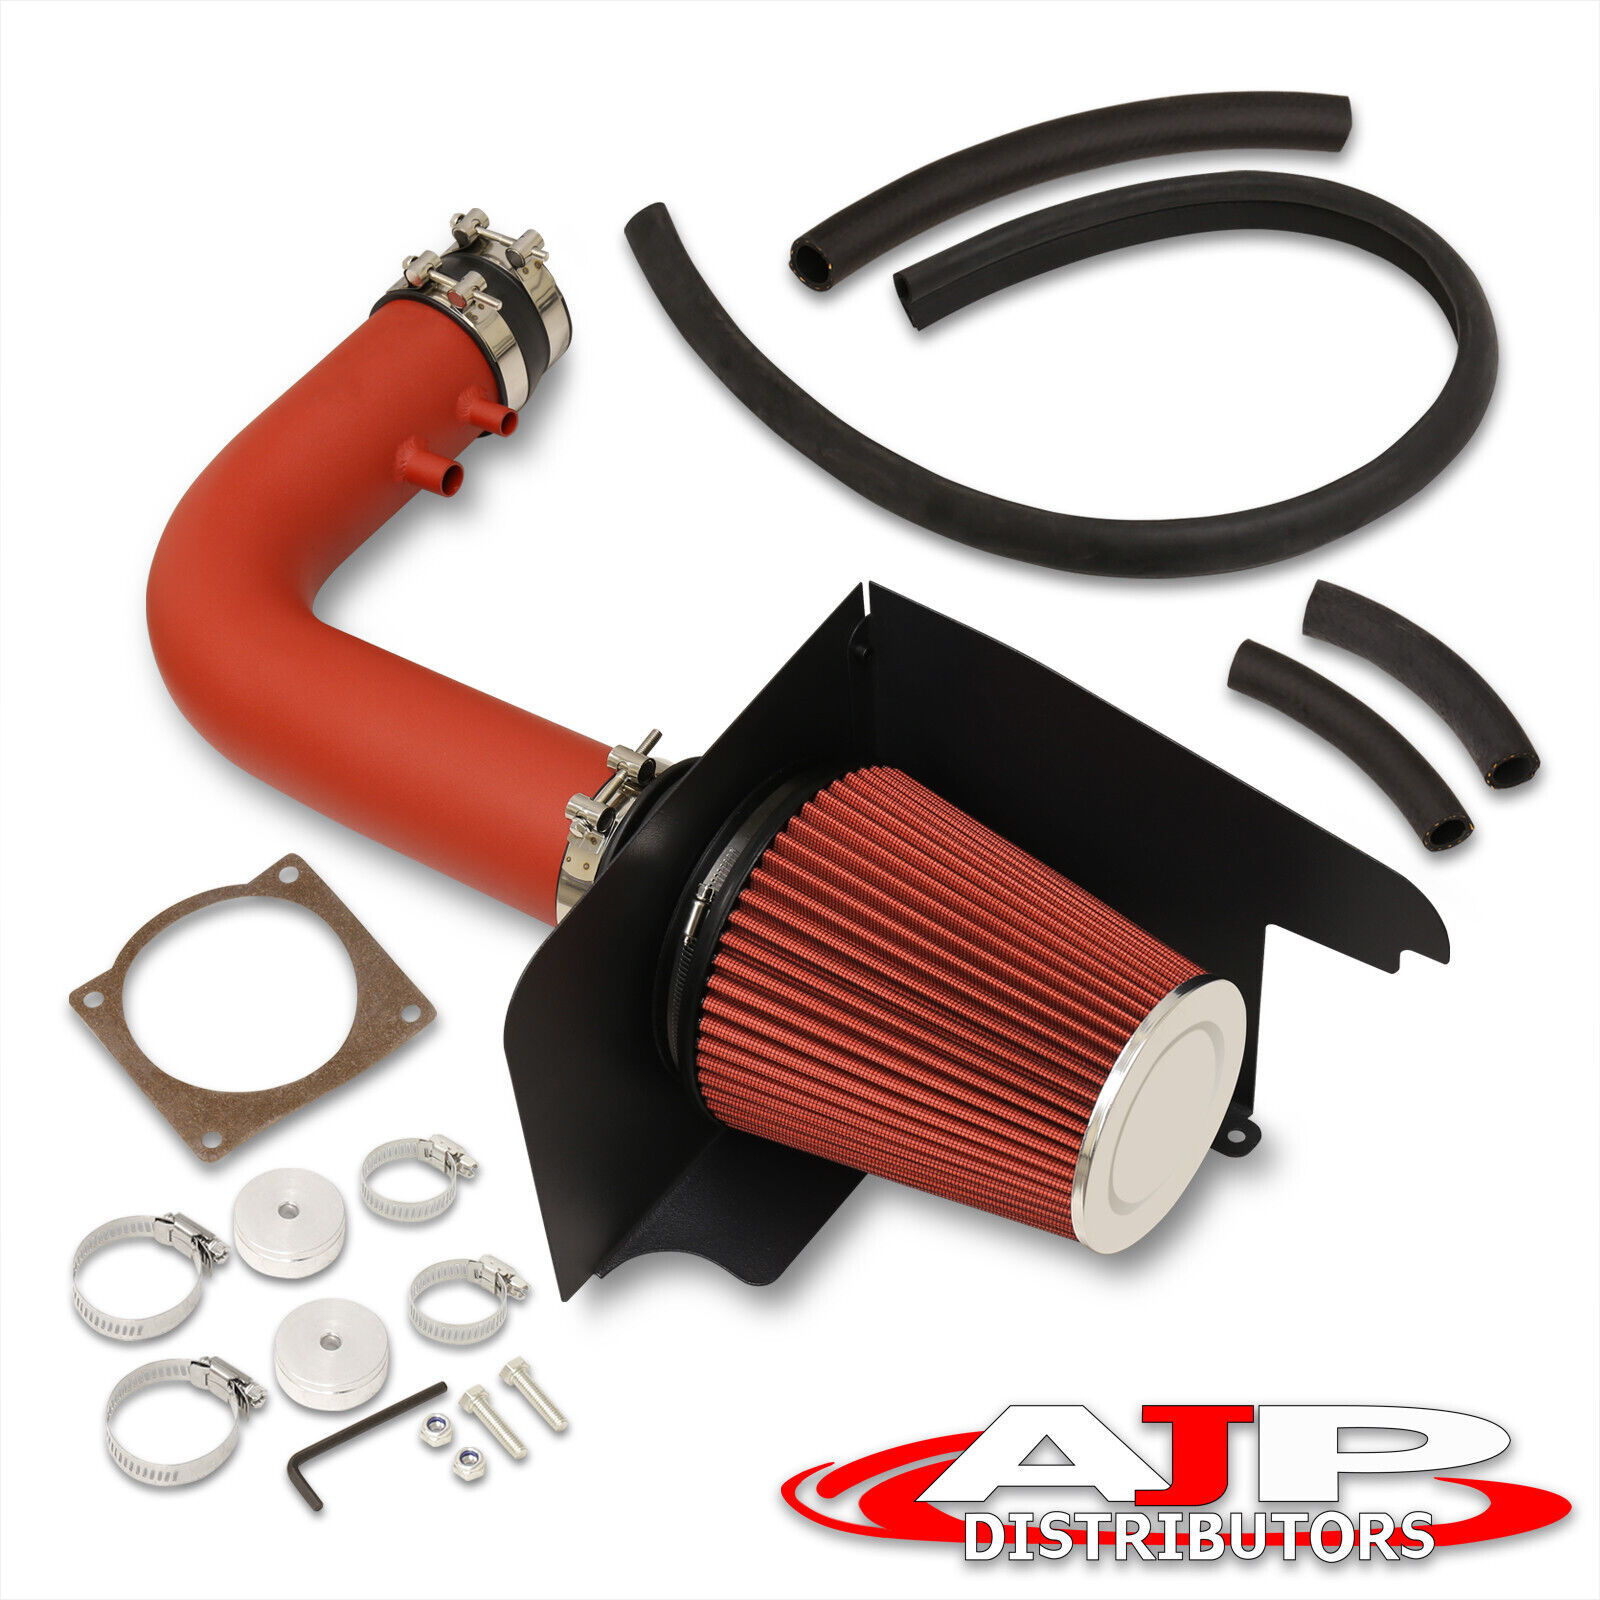 Red Cold Air Intake + Heat Shield Filter For 1997-2003 Ford F150 Expedition V8